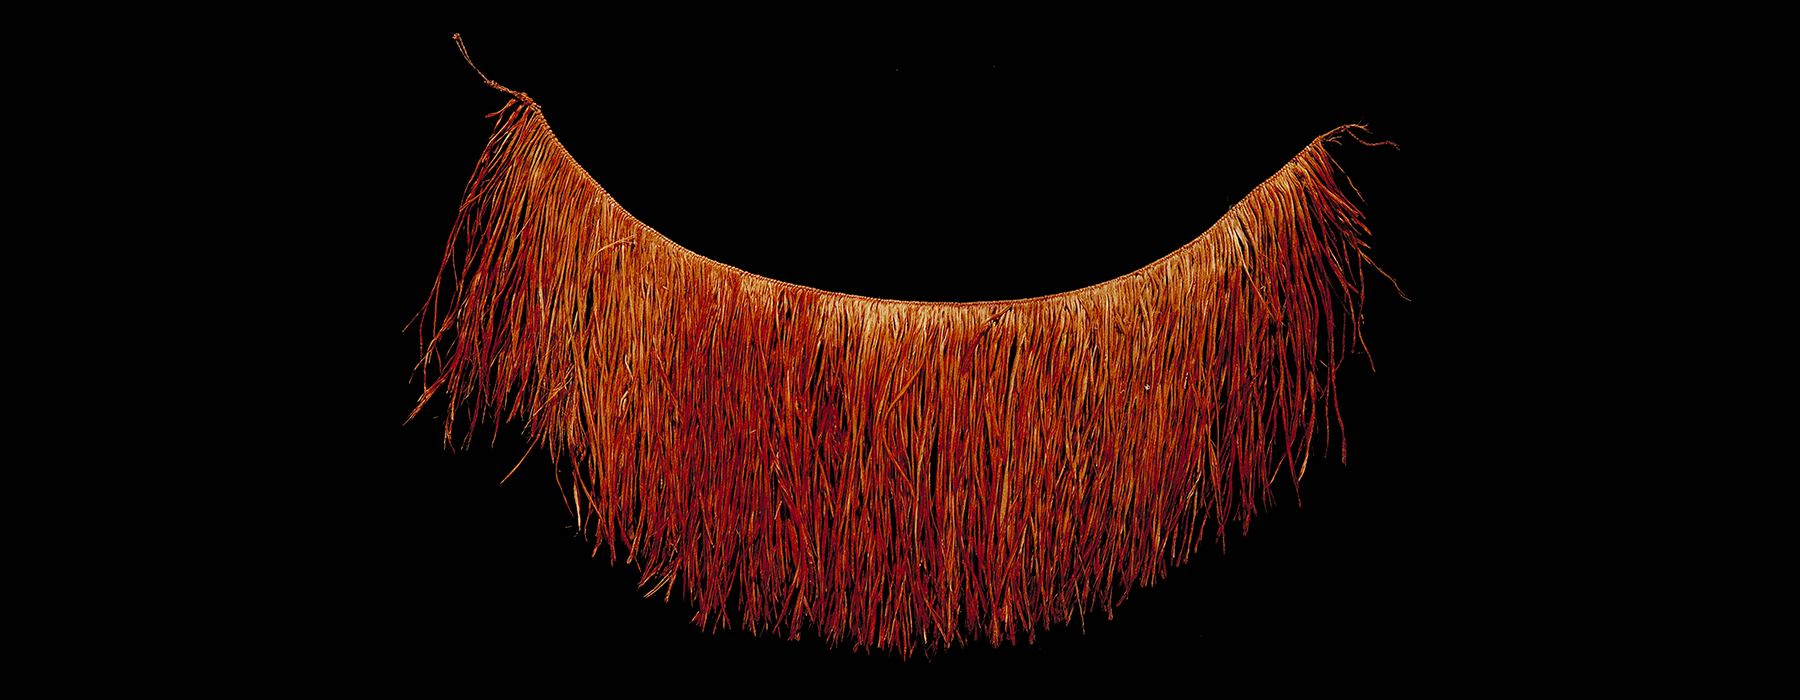 A red skirt made of coconut fibre that has been opened out over a black background.